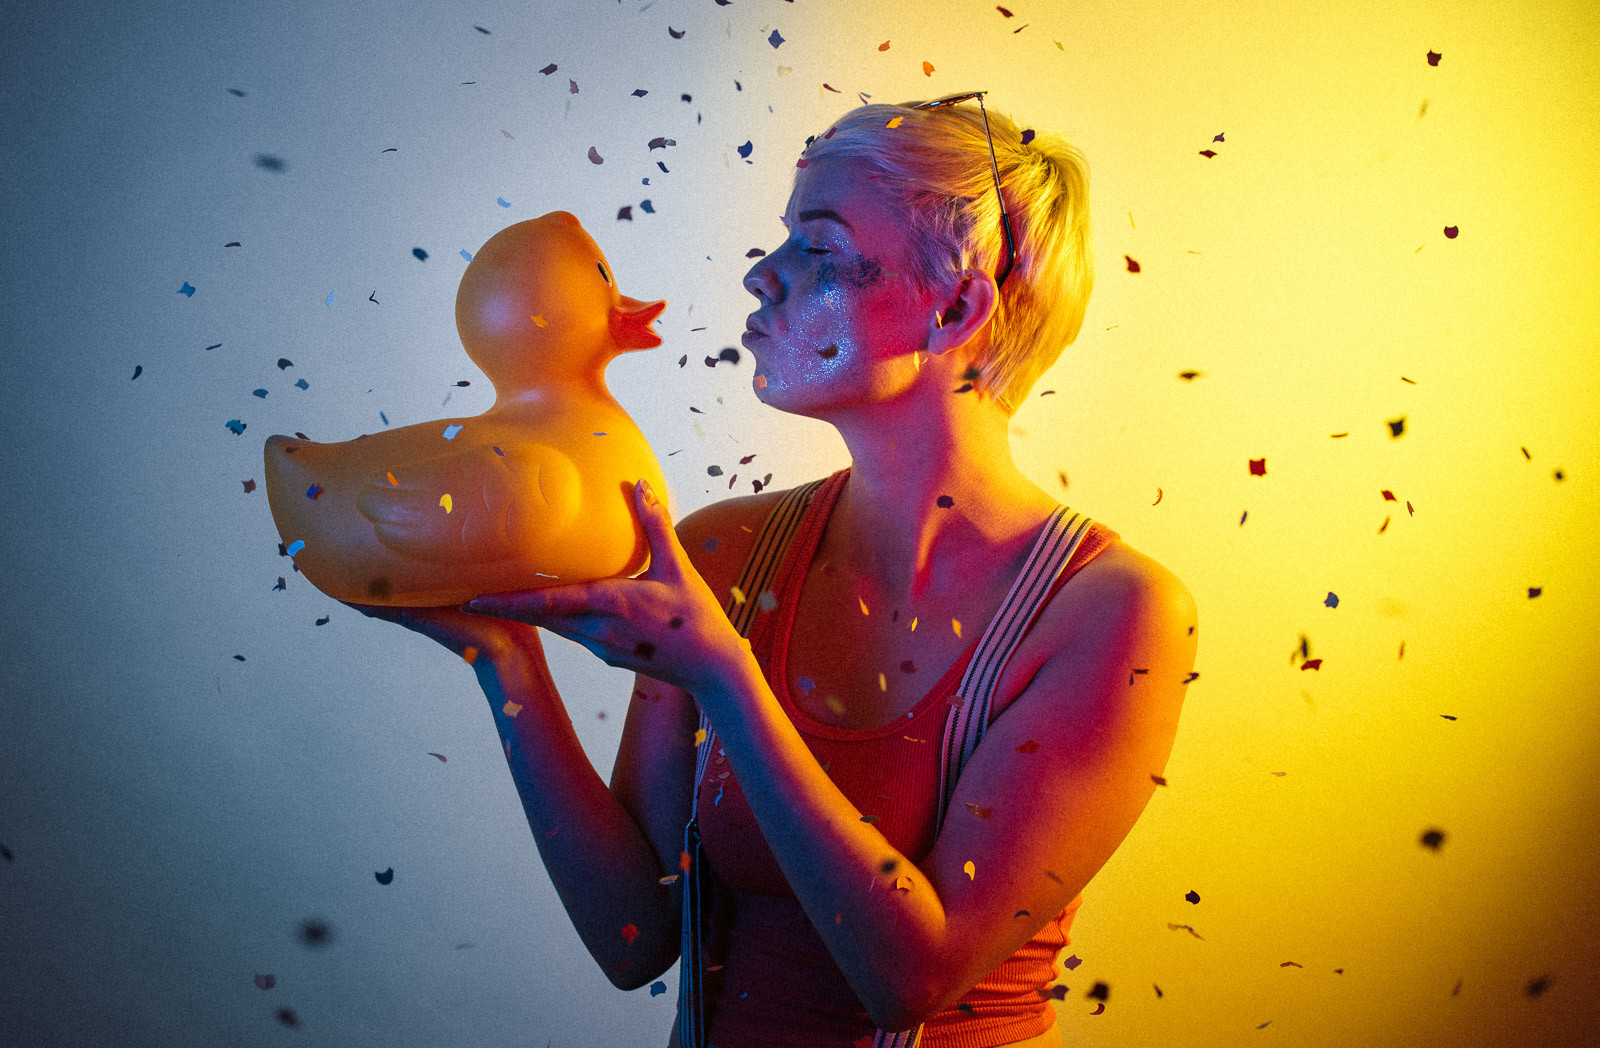 portrait of young woman with short hair wearing sunglasses and holding rubber duck with yellow and blue studio light